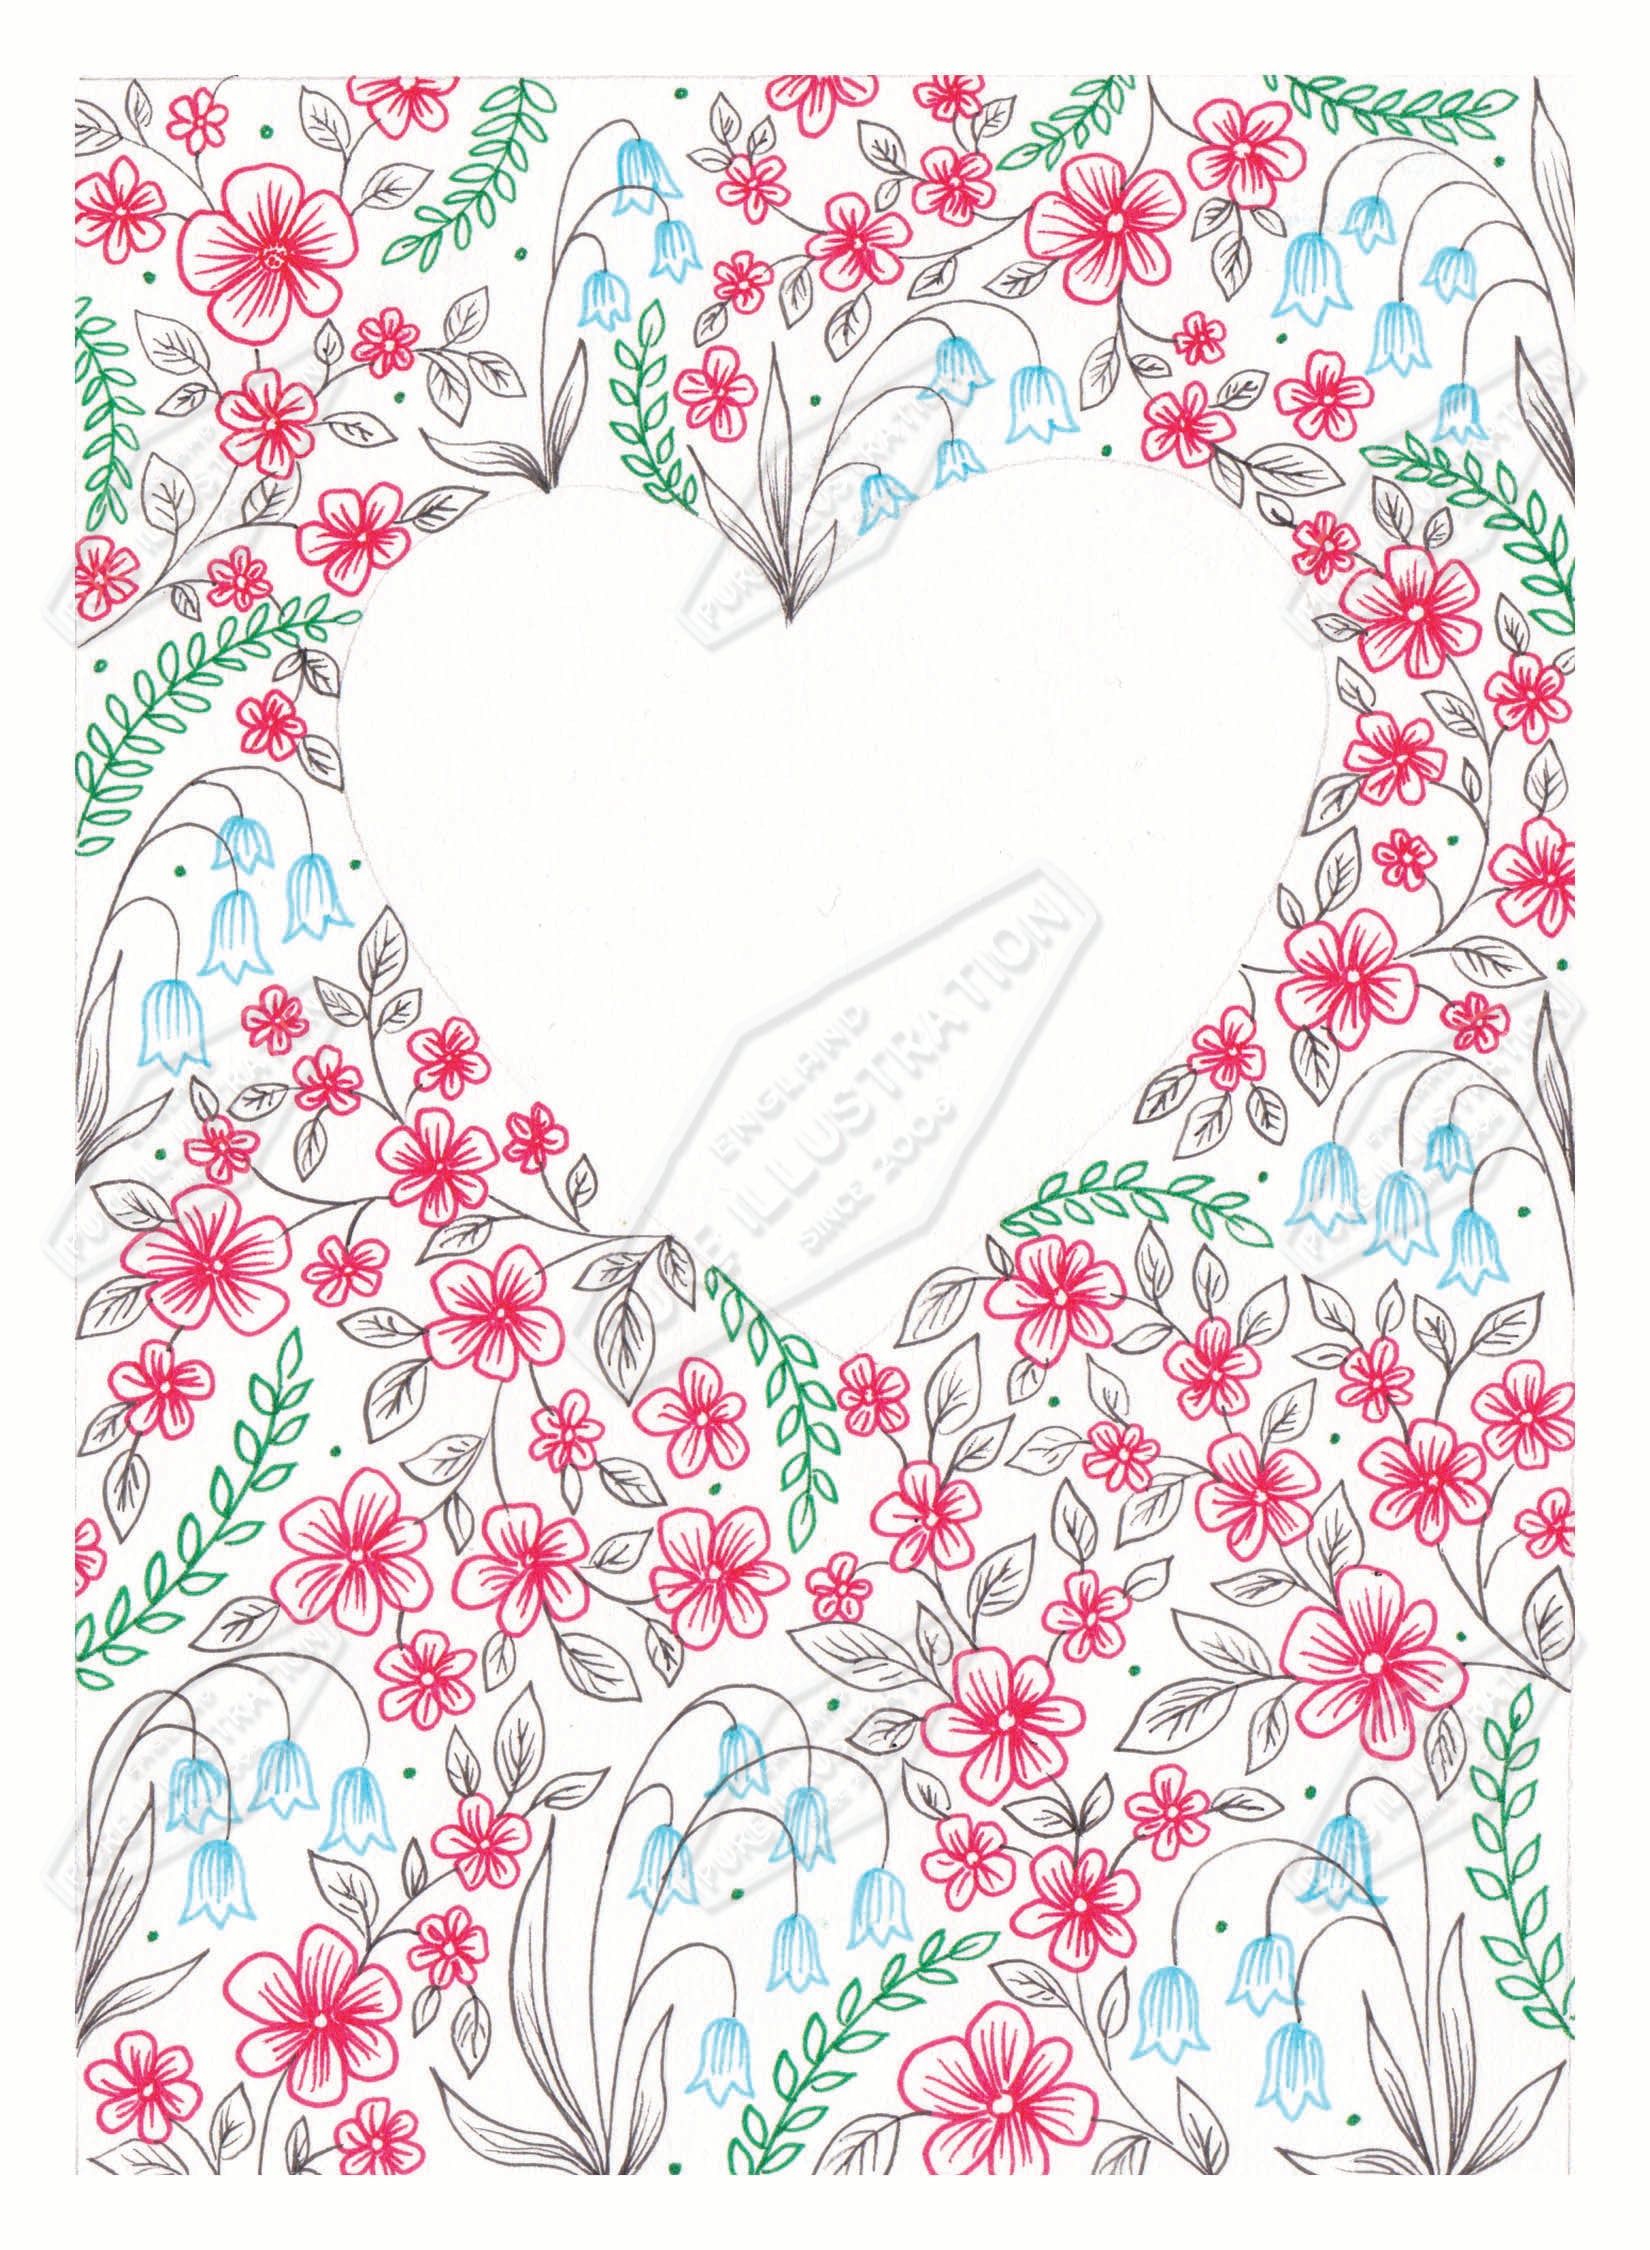 00035818AMA - Ally Marie is represented by Pure Art Licensing Agency - Valentine's Day Greeting Card Design